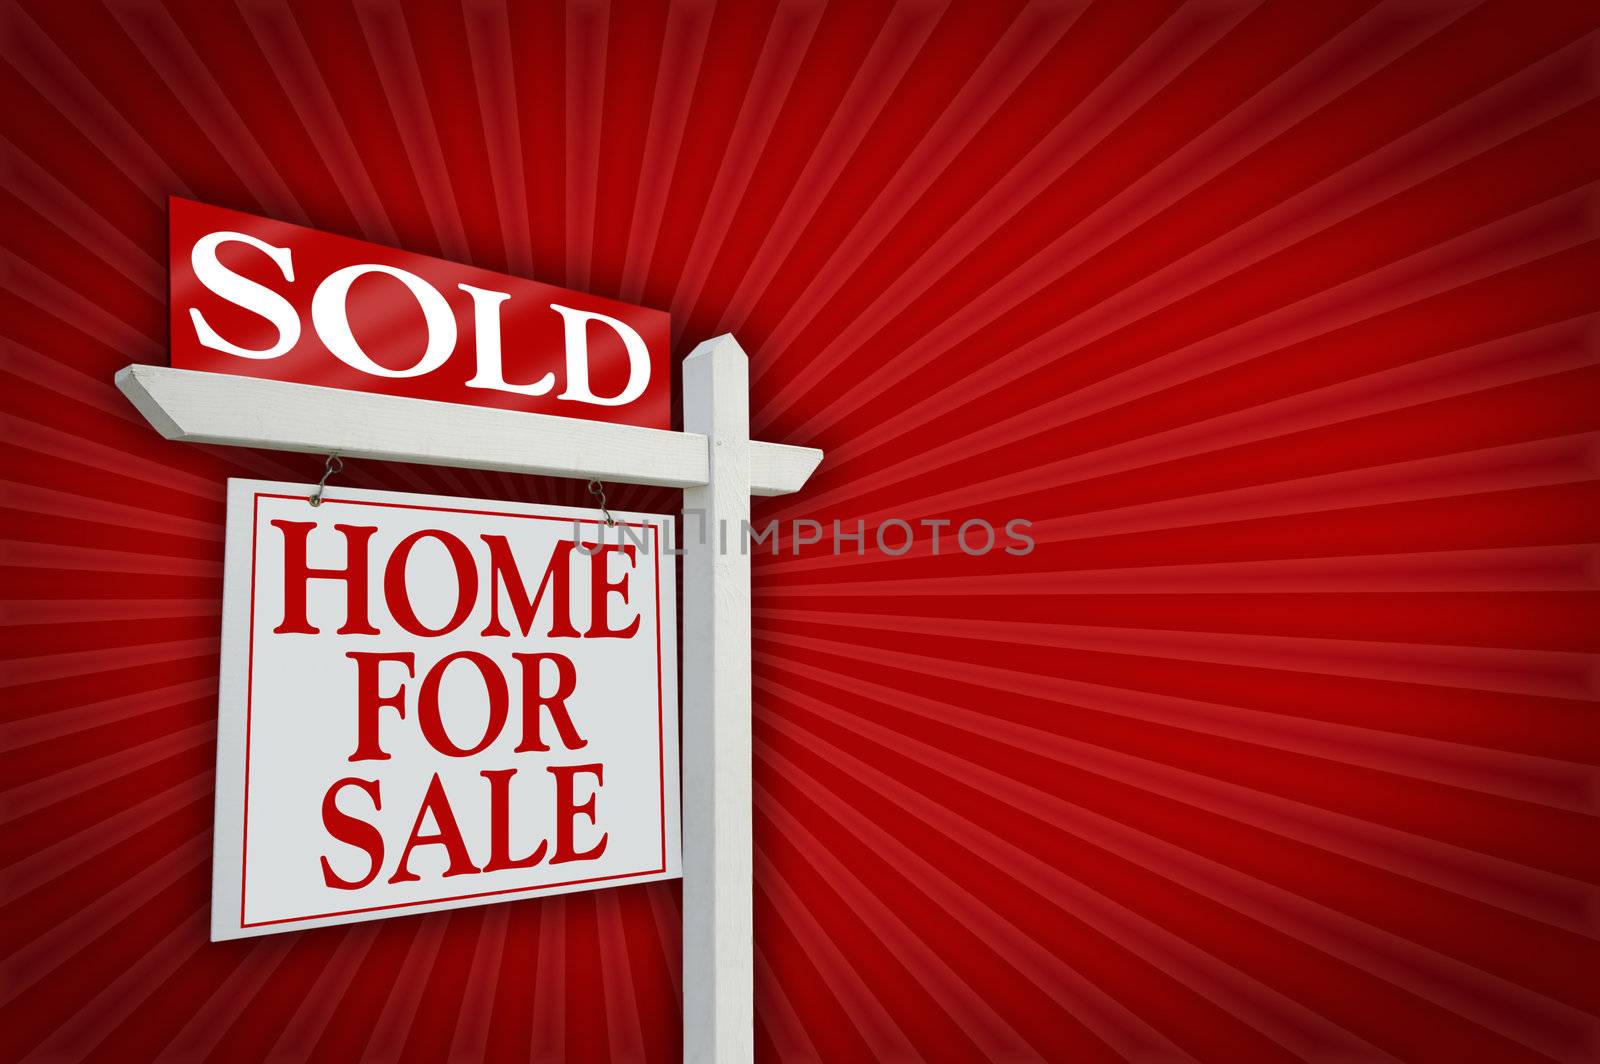 Sold Home for Sale sign on dramatic red background.